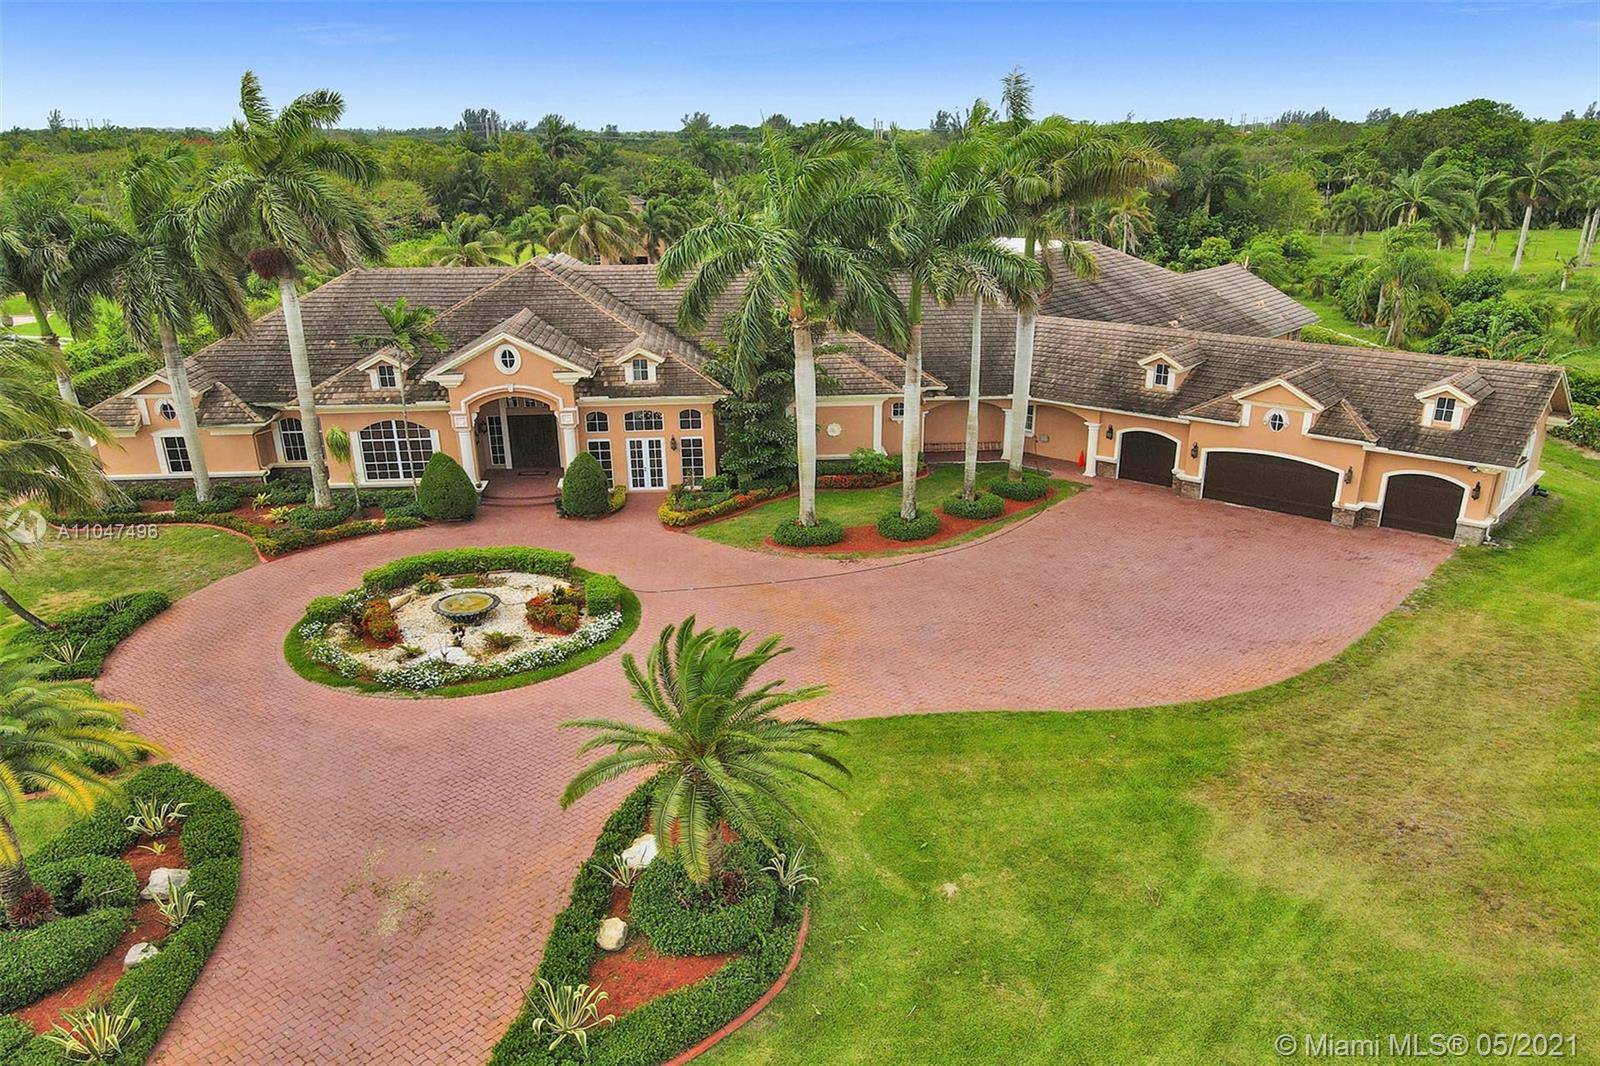 Luxurious 11, 772 sq. Ft ranch style home located on 3.